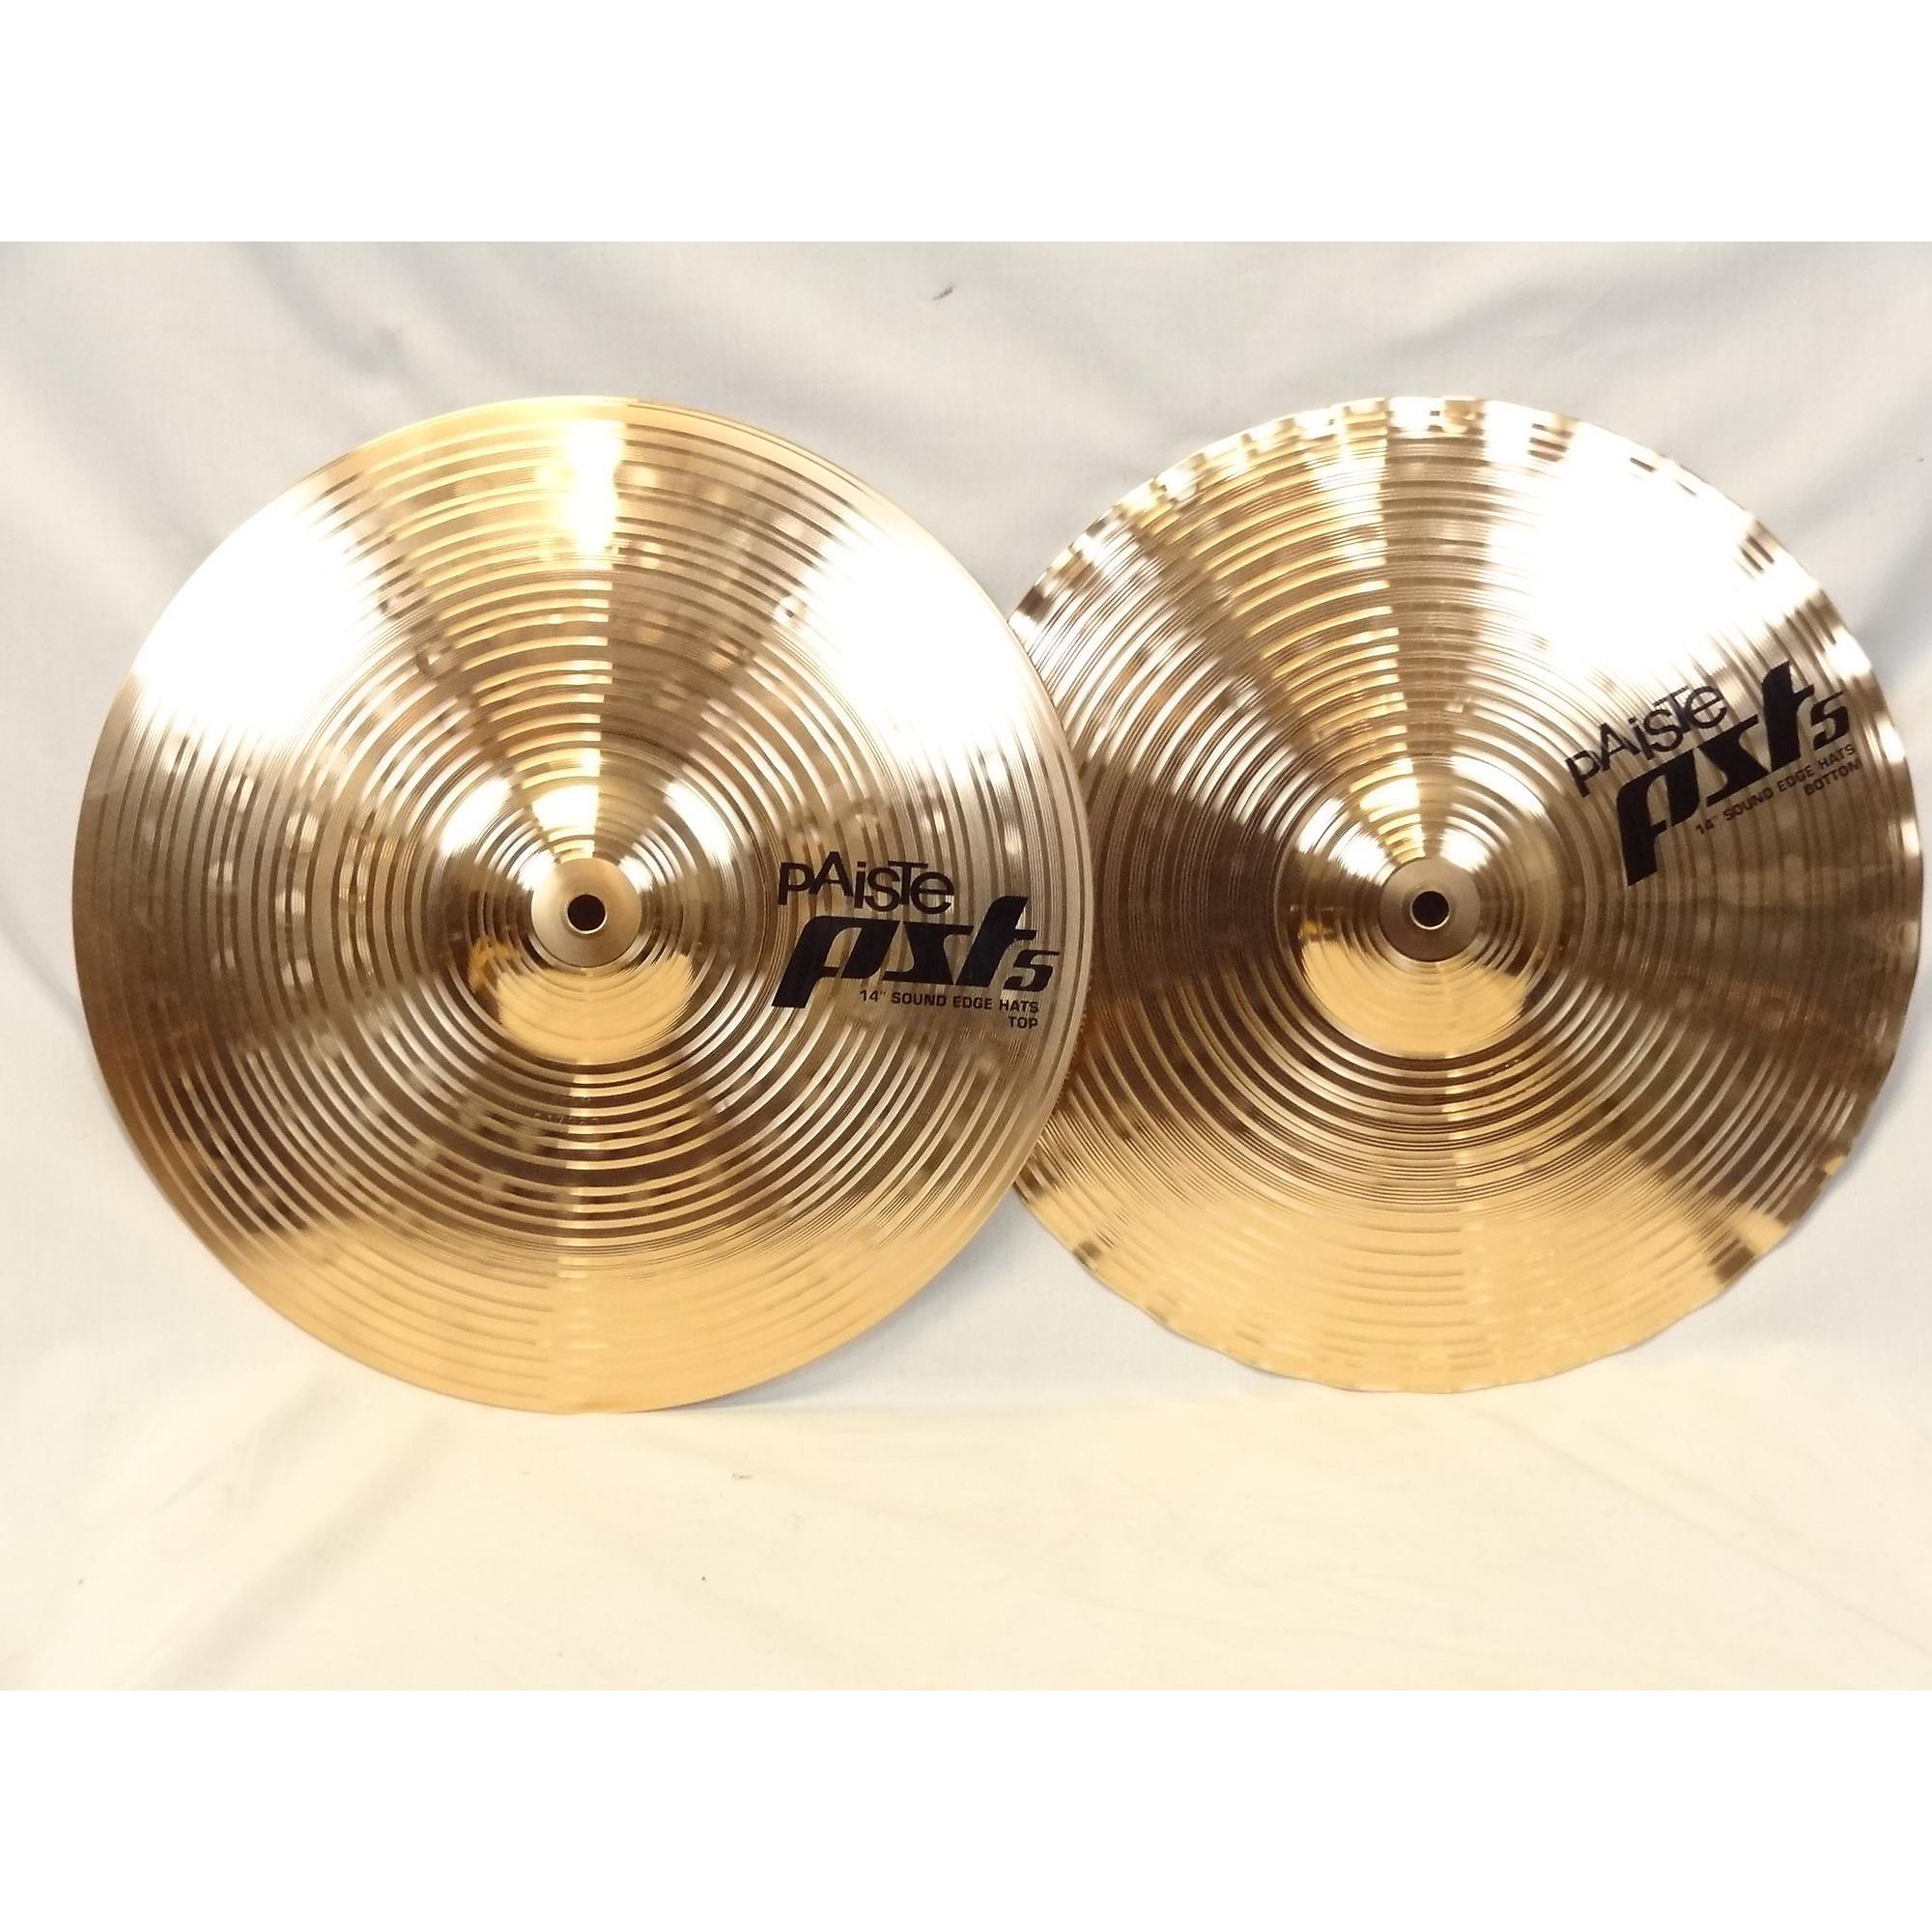 Used Paiste 14in PST5 Sound Edge Hi Hat Pair Cymbal